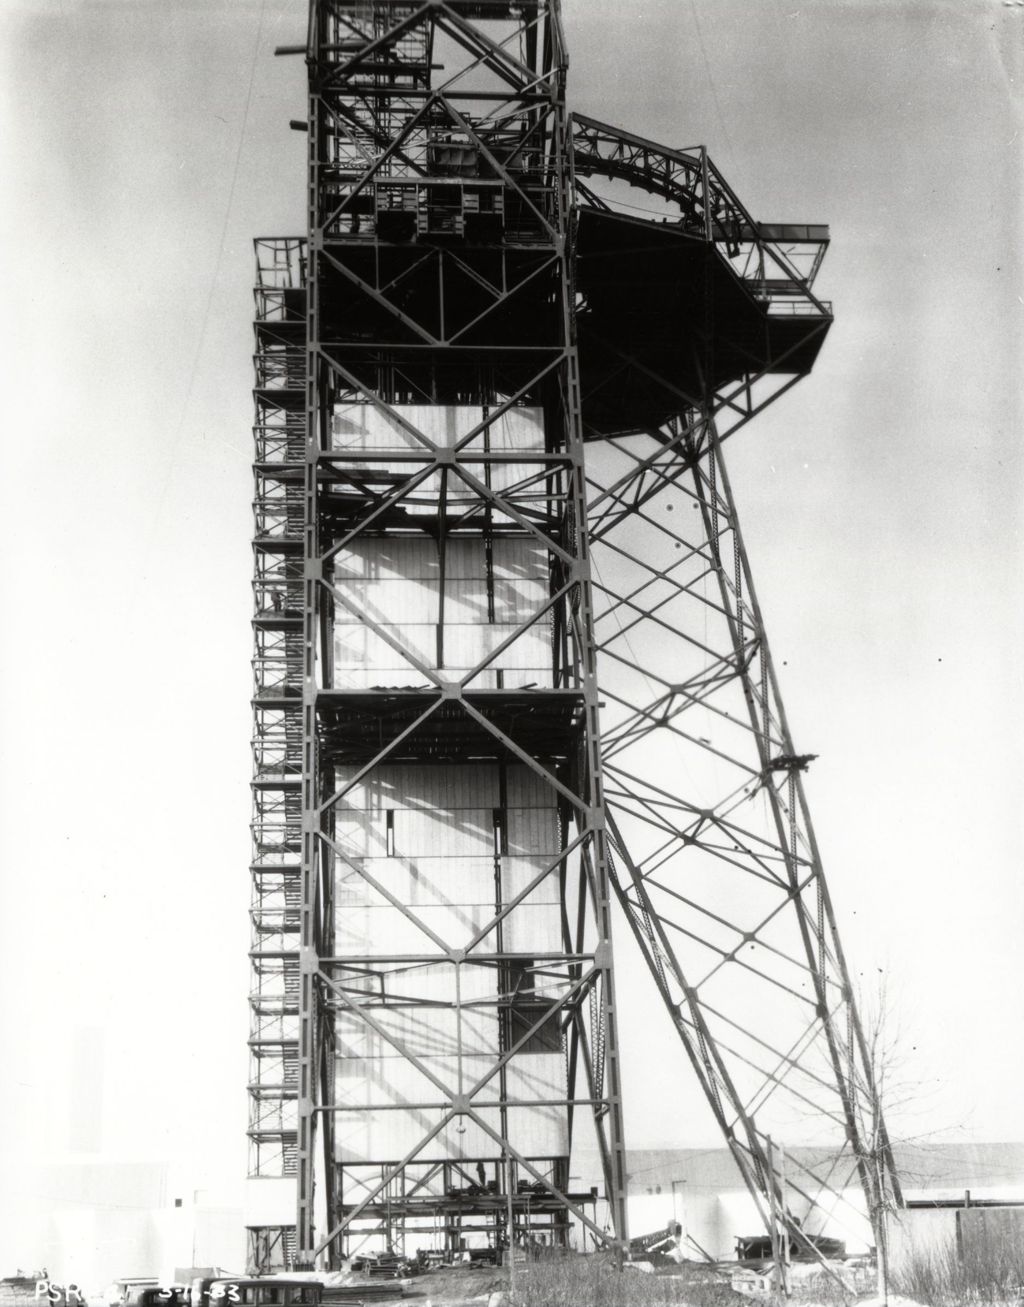 Miniature of Construction of the one of the Century of Progress Skyride towers